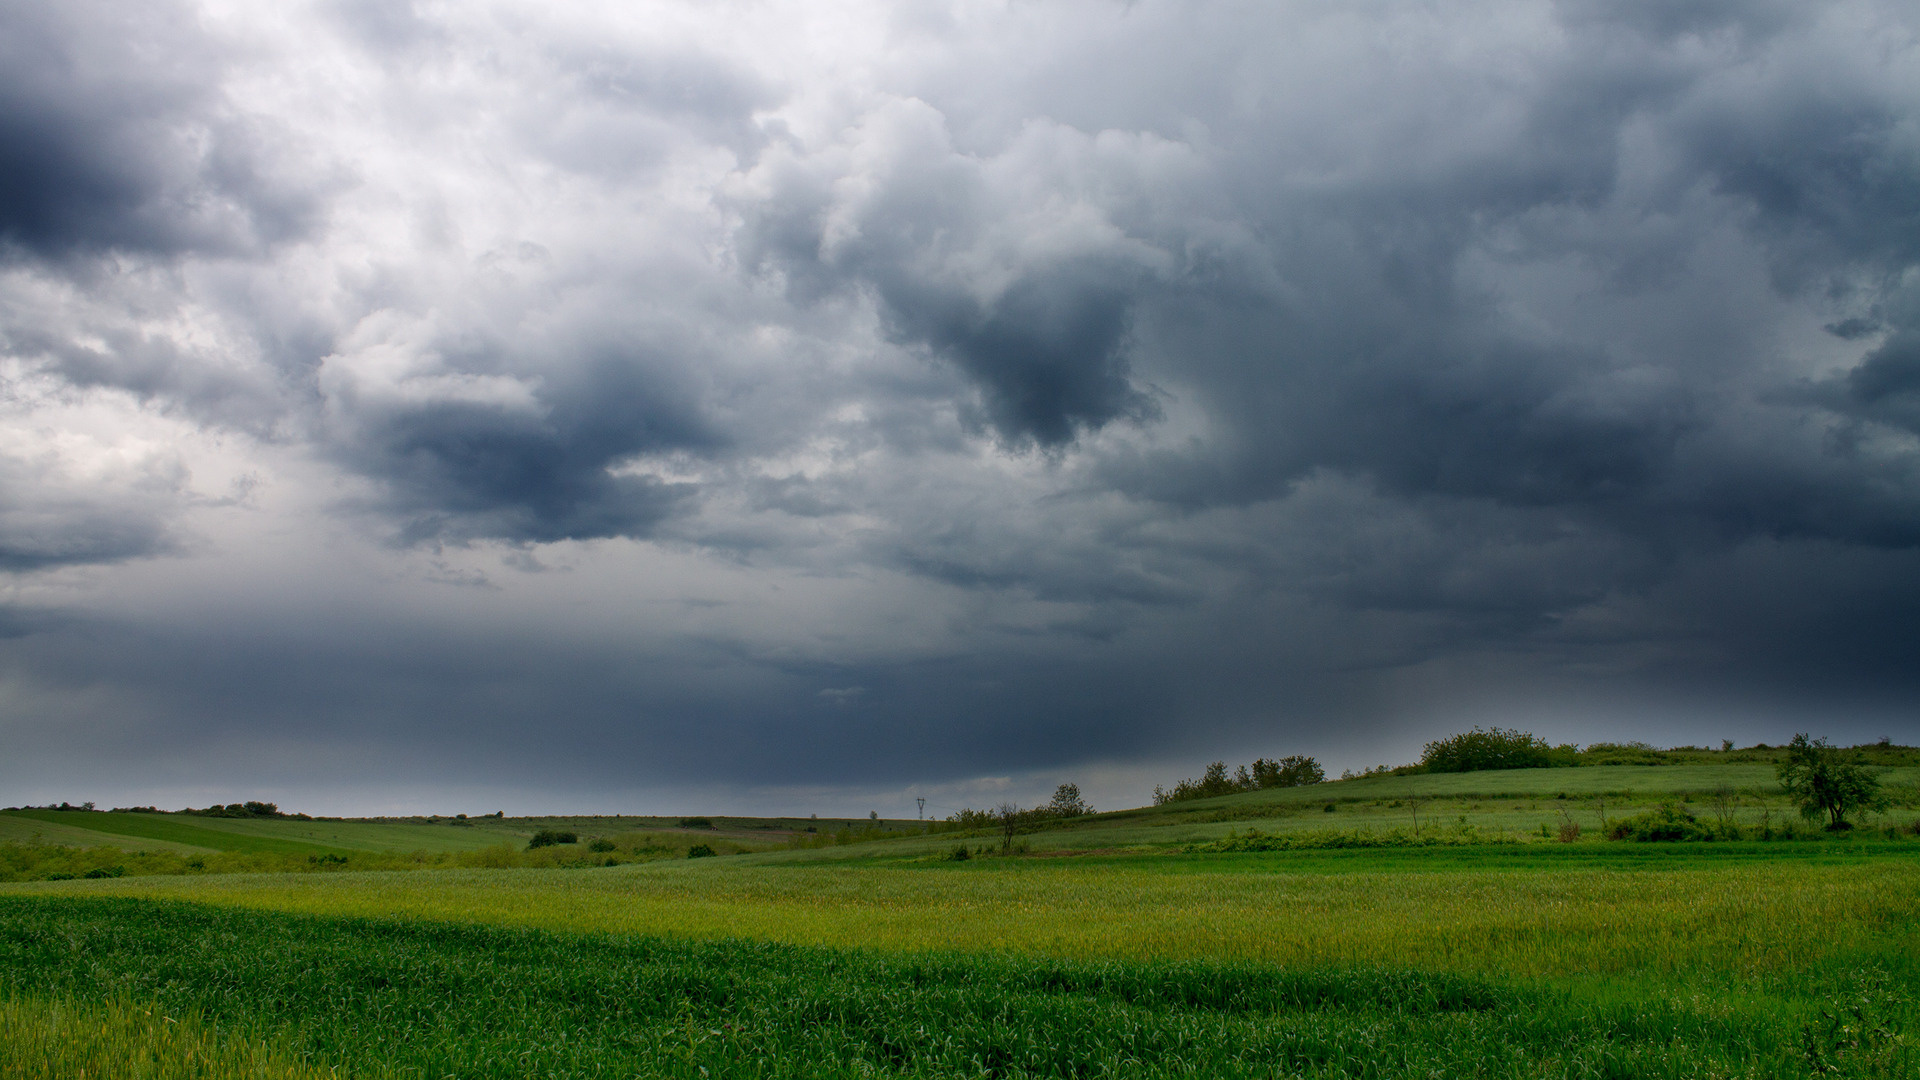 Gray Cloudy Sky: A green, rolling countryside, A black-bellied cloud looming on the horizon, Weather phenomena. 1920x1080 Full HD Background.